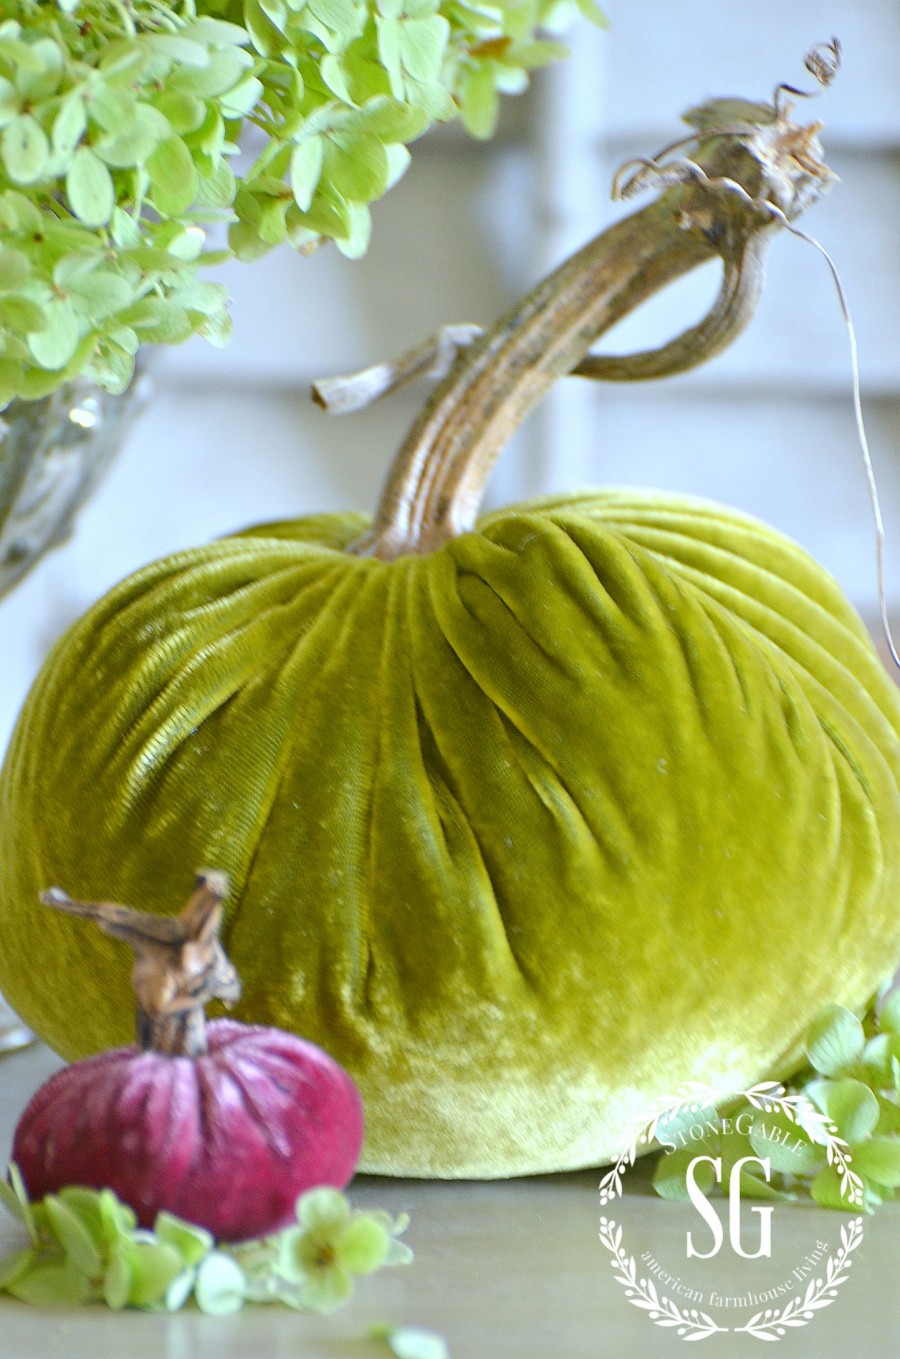 5 BEAUTIFUL WAYS TO STYLE PUMPKINS-Let's get creative with our pumpkins and do some amazing styling!- stonegableblog.com